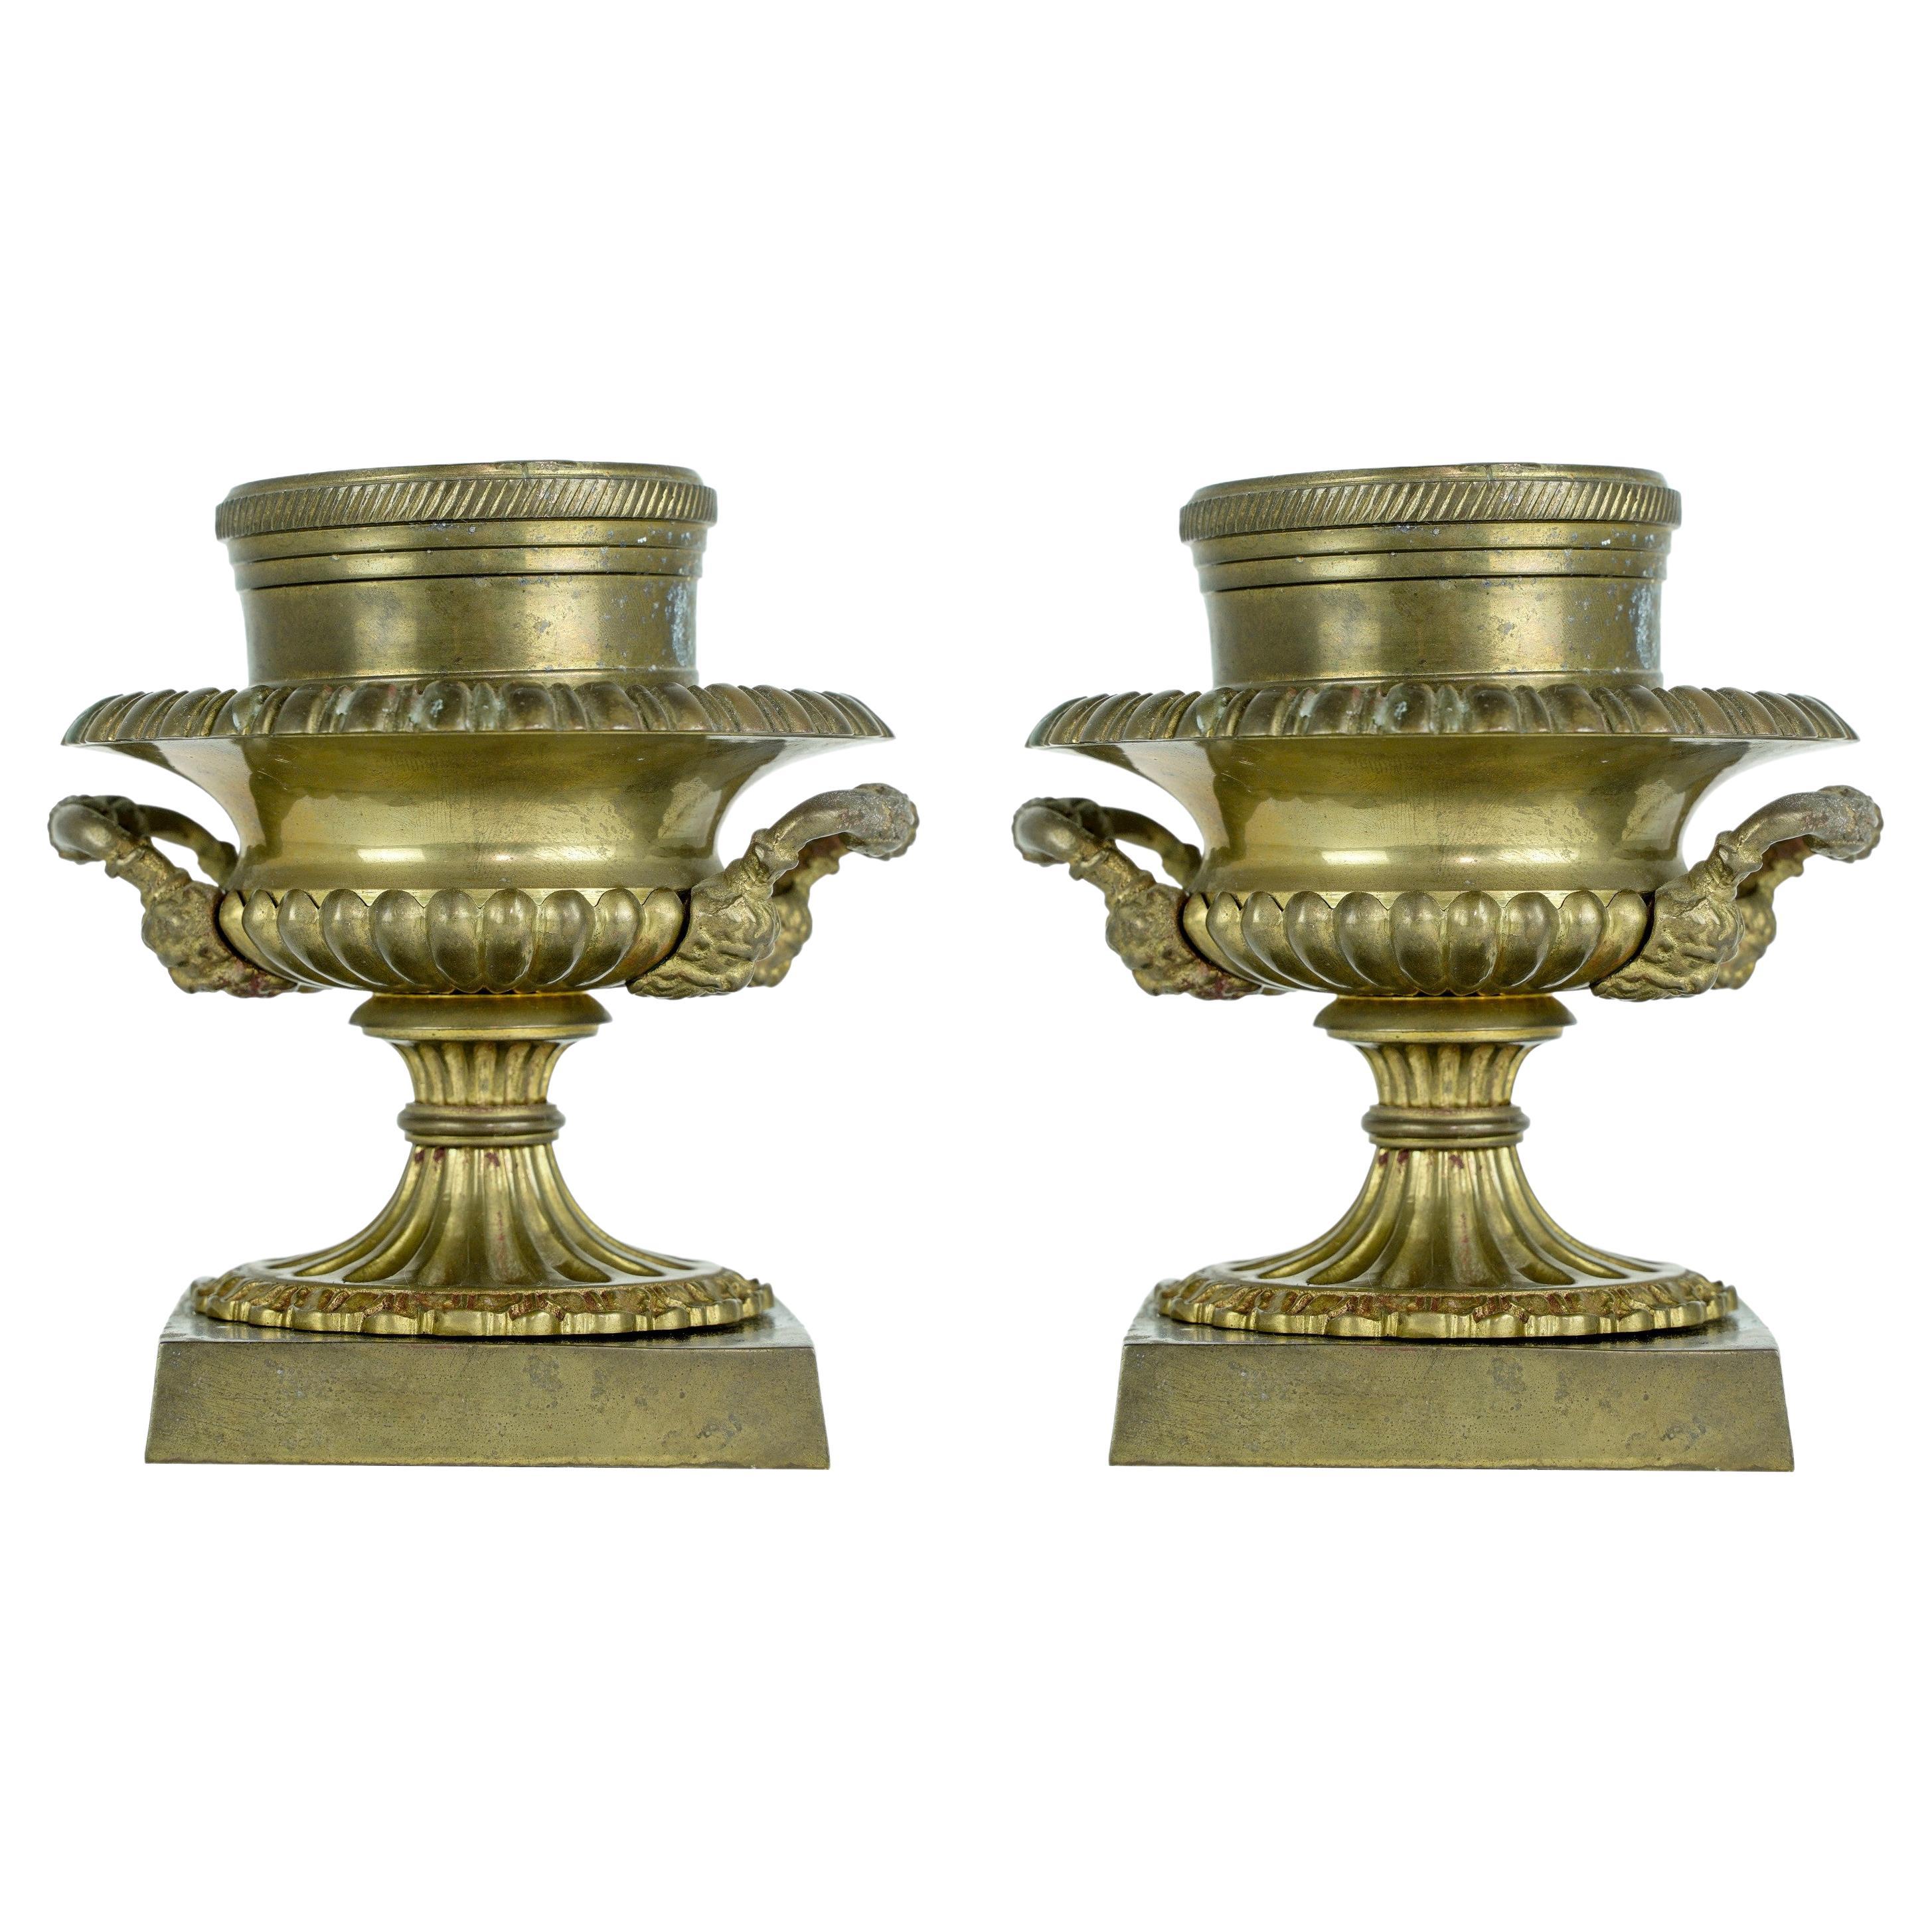 Pair of Solid Brass Candle Holders by Mottahedeh